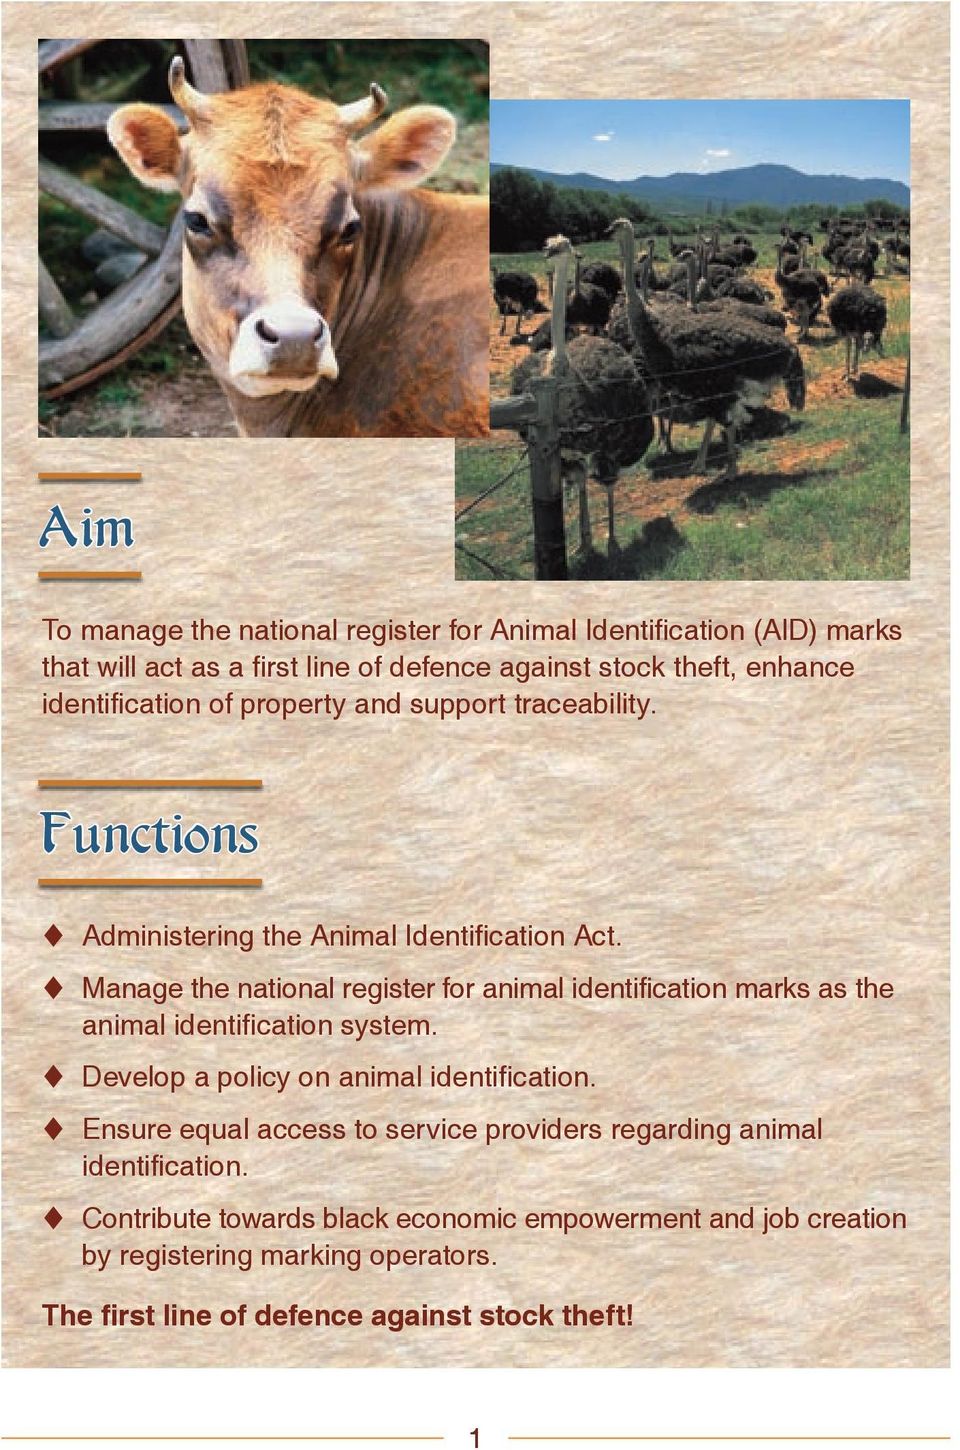 t Manage the national register for animal identification marks as the animal identification system. t Develop a policy on animal identification.